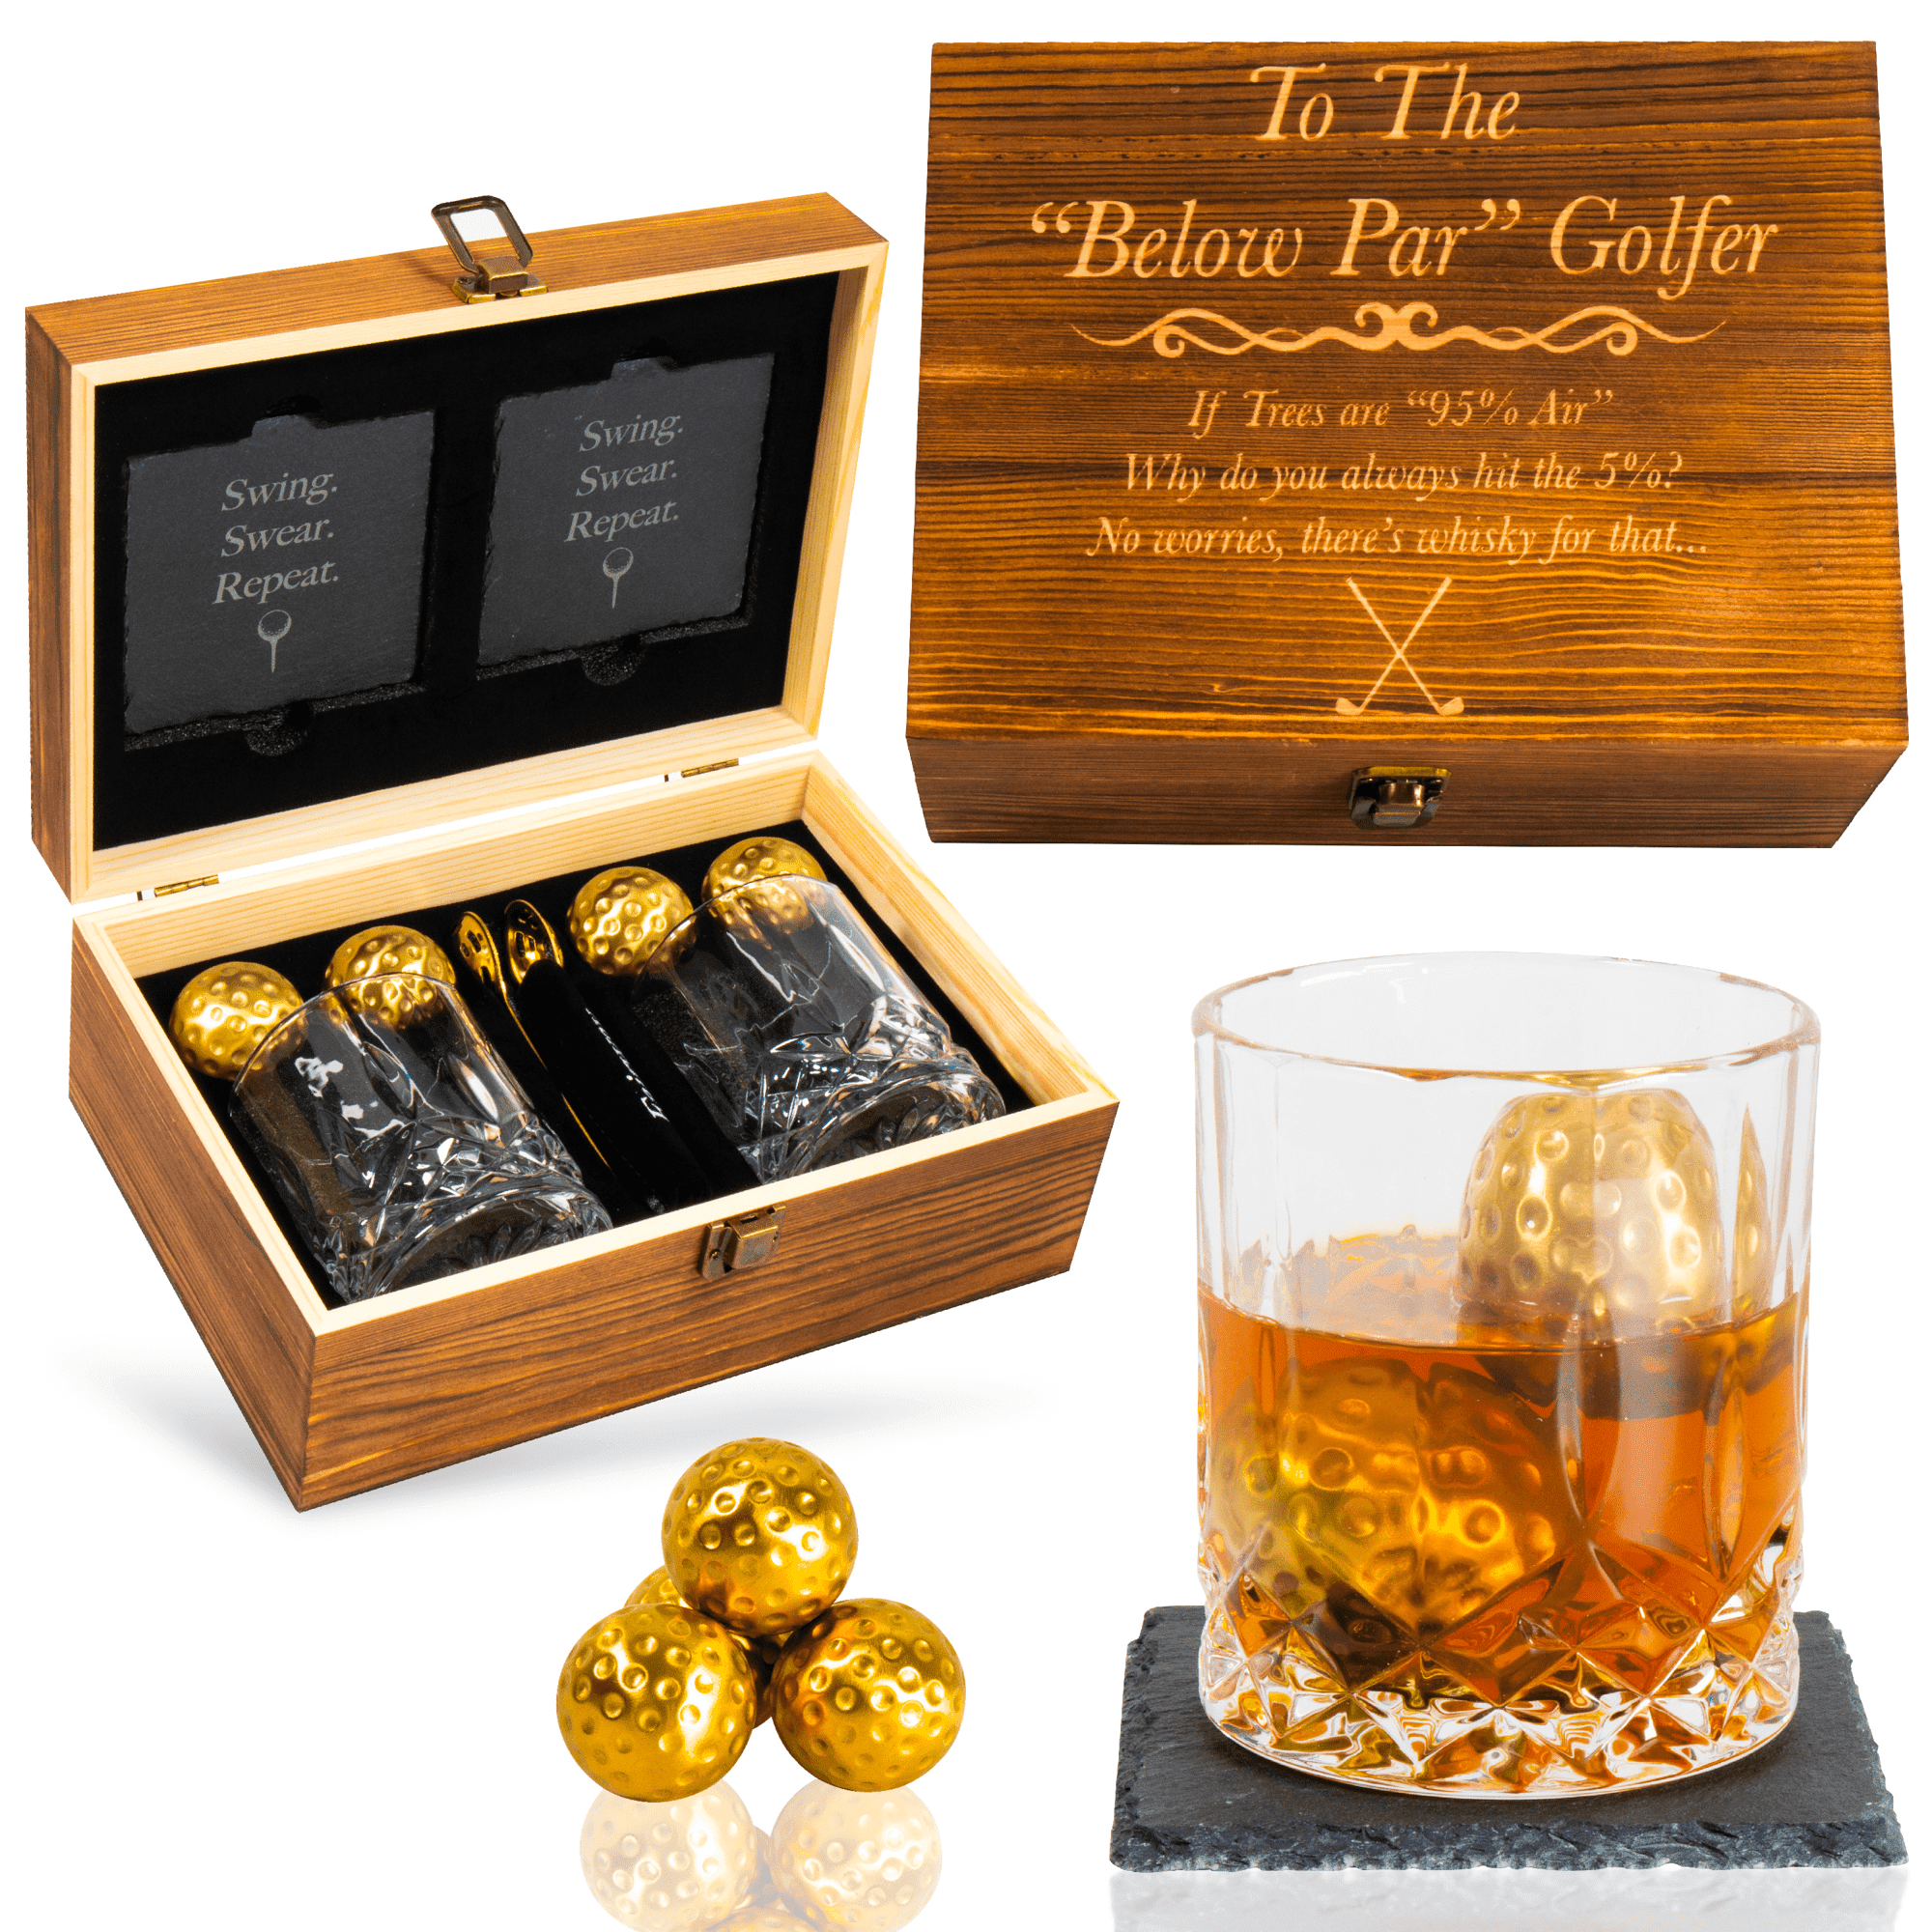 GreenCor Funny Golf Anniversary Gifts for Men, Him, Husband, Friend -  Whiskey Glass Set Engraved 'To The “Below Par” Golfer”' Gifts for Birthday,  Christmas, Friend, Bachelors Party, Anniversary 